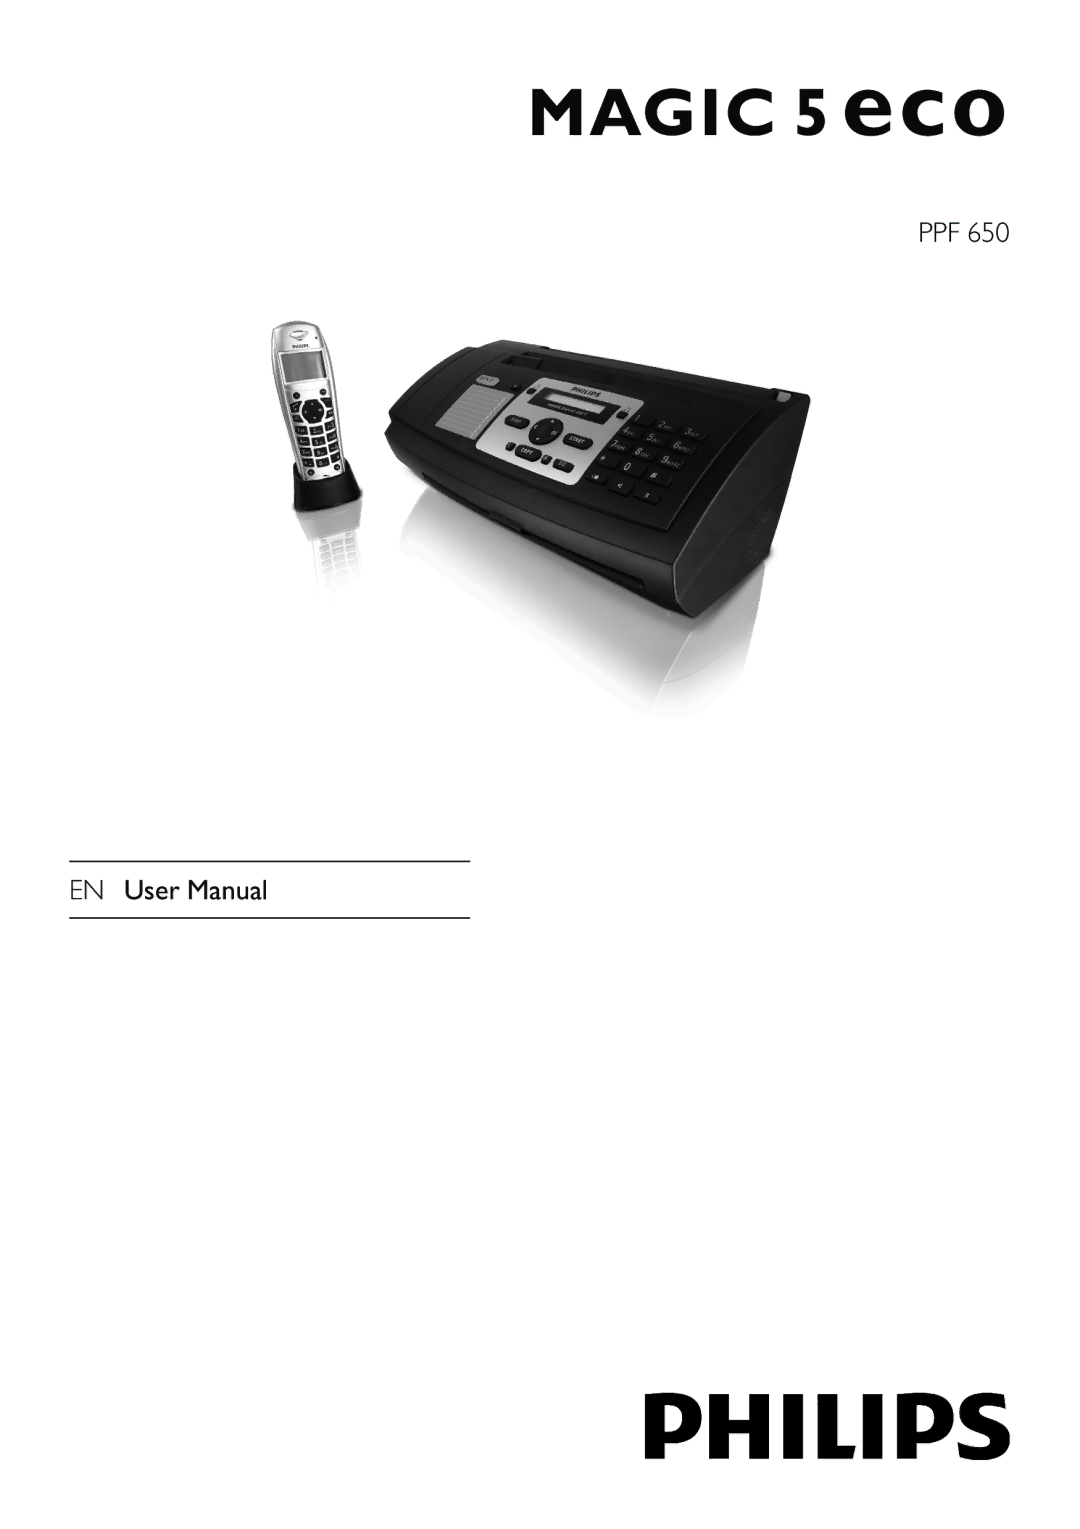 Philips PPF 650 user manual Ppf 